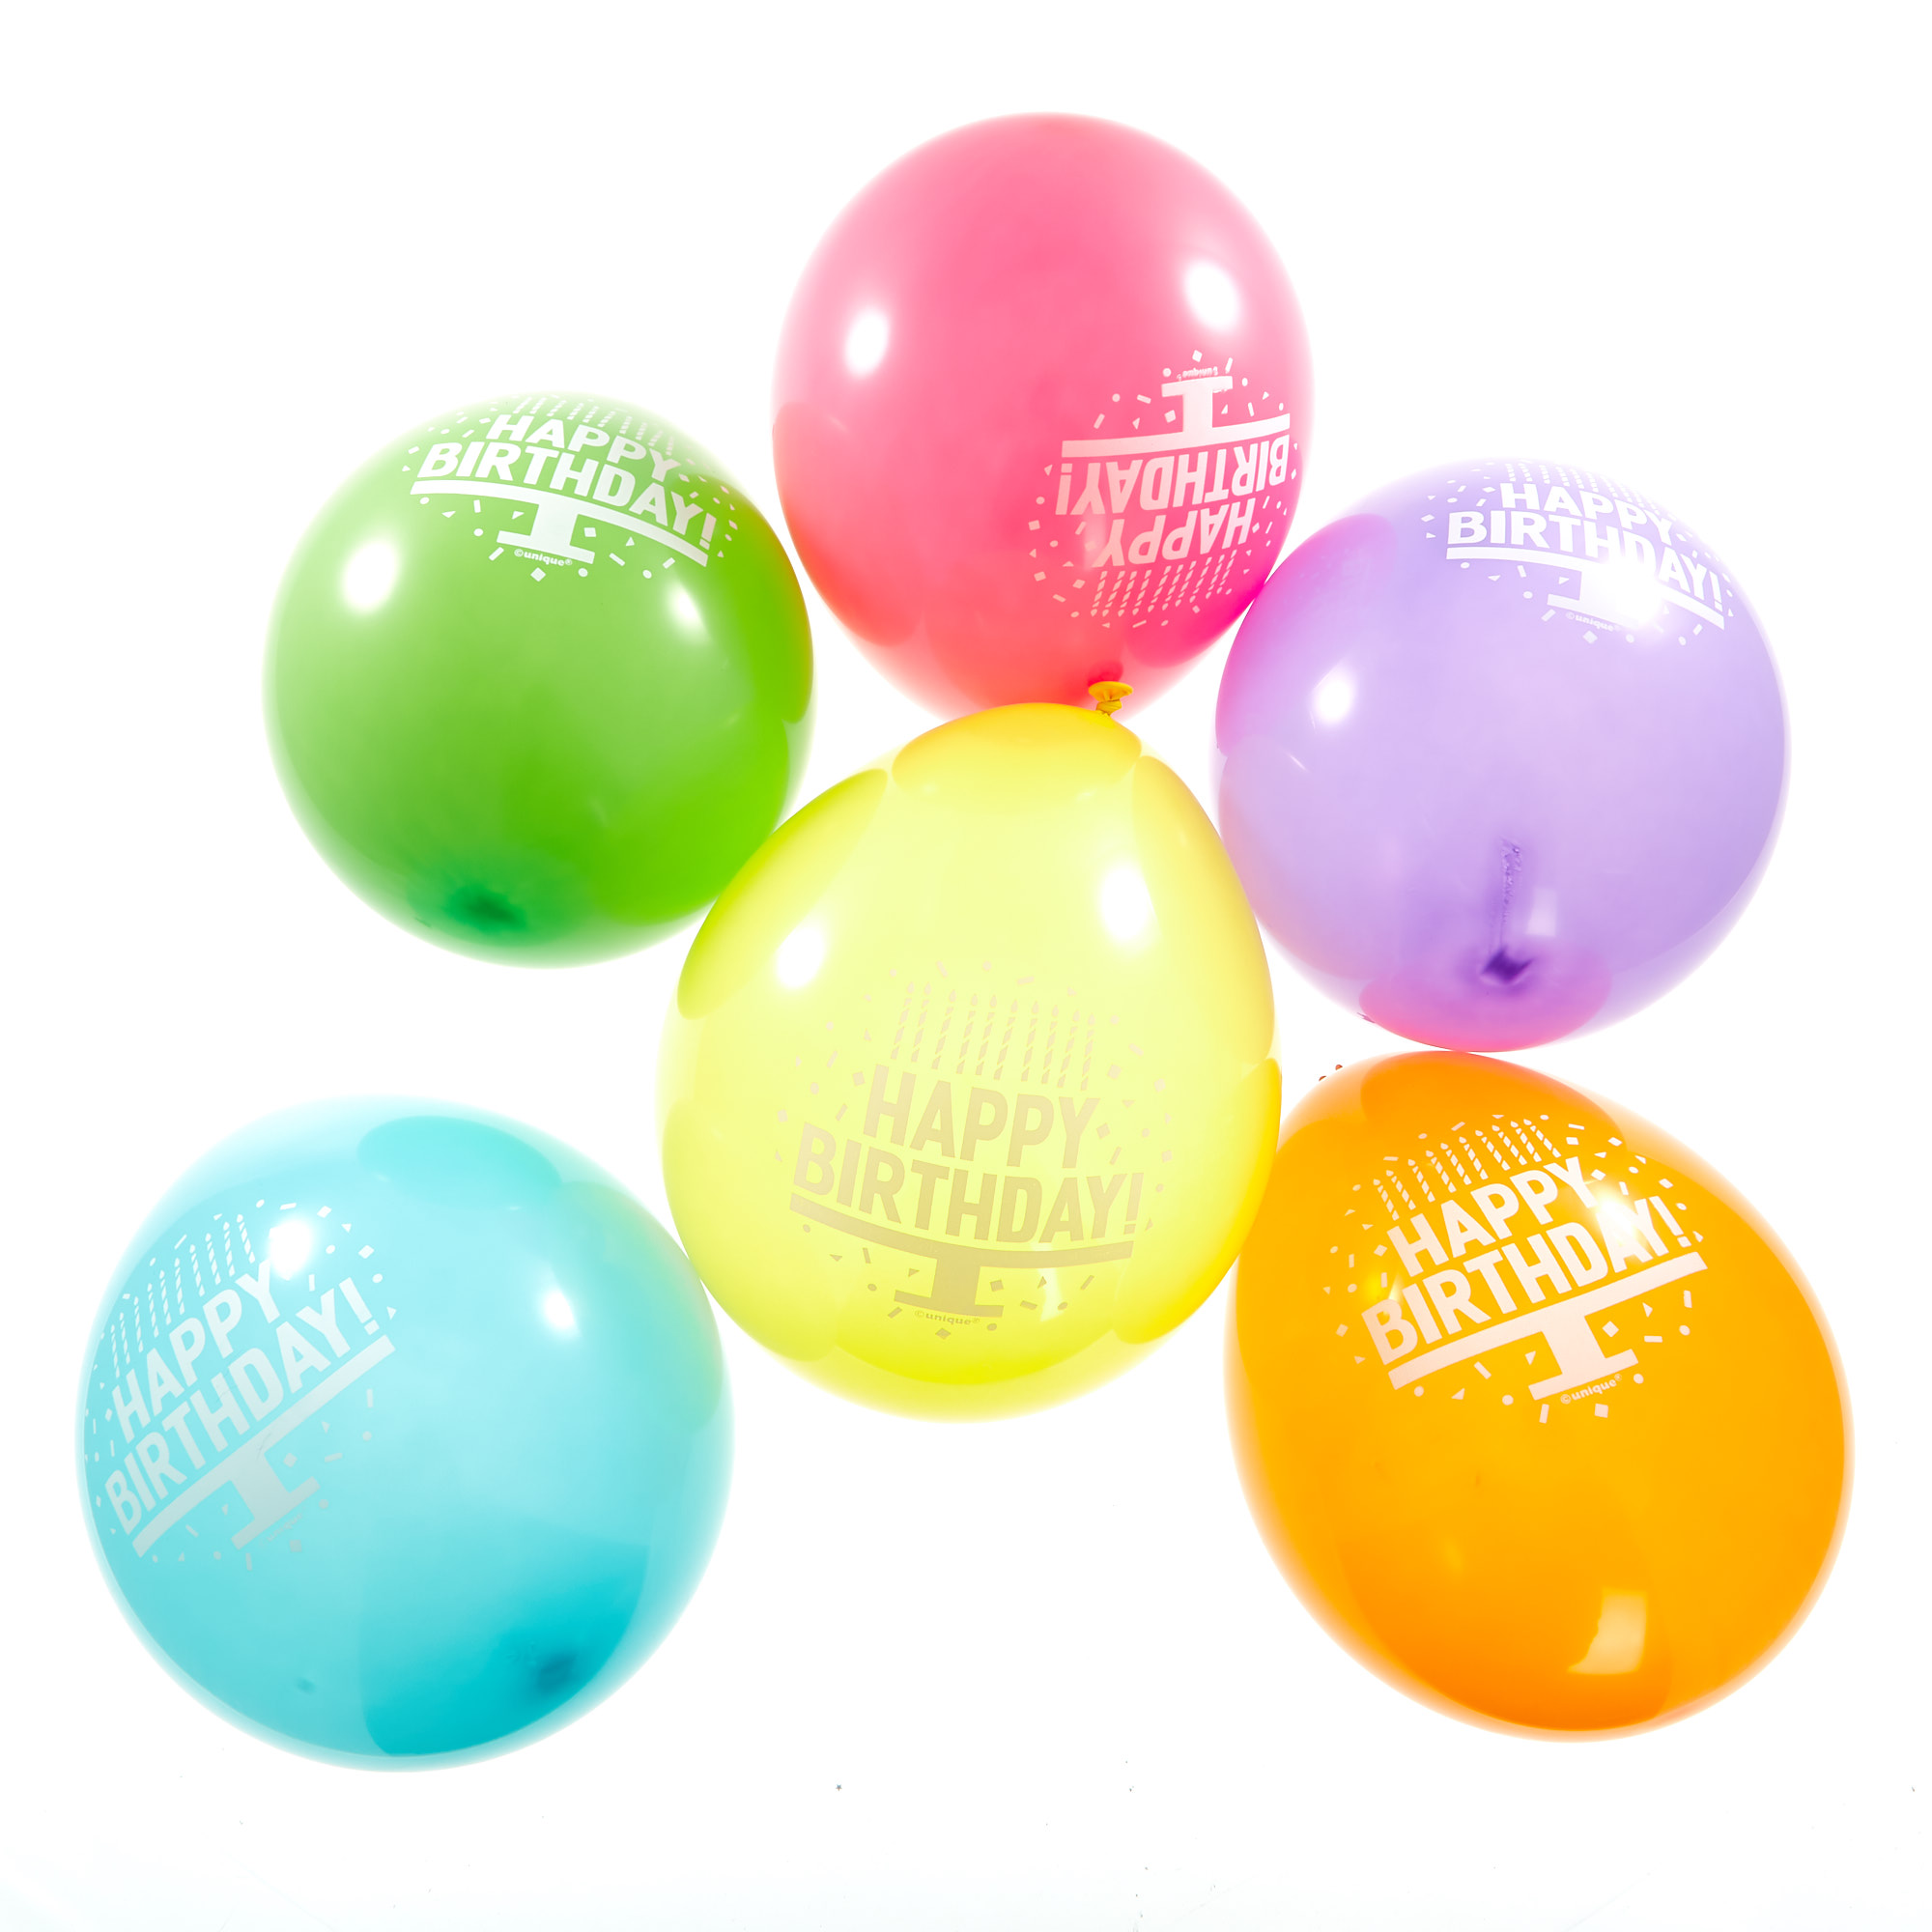 Happy Birthday Balloons Party Tableware & Decorations Bundle - 8 Guests